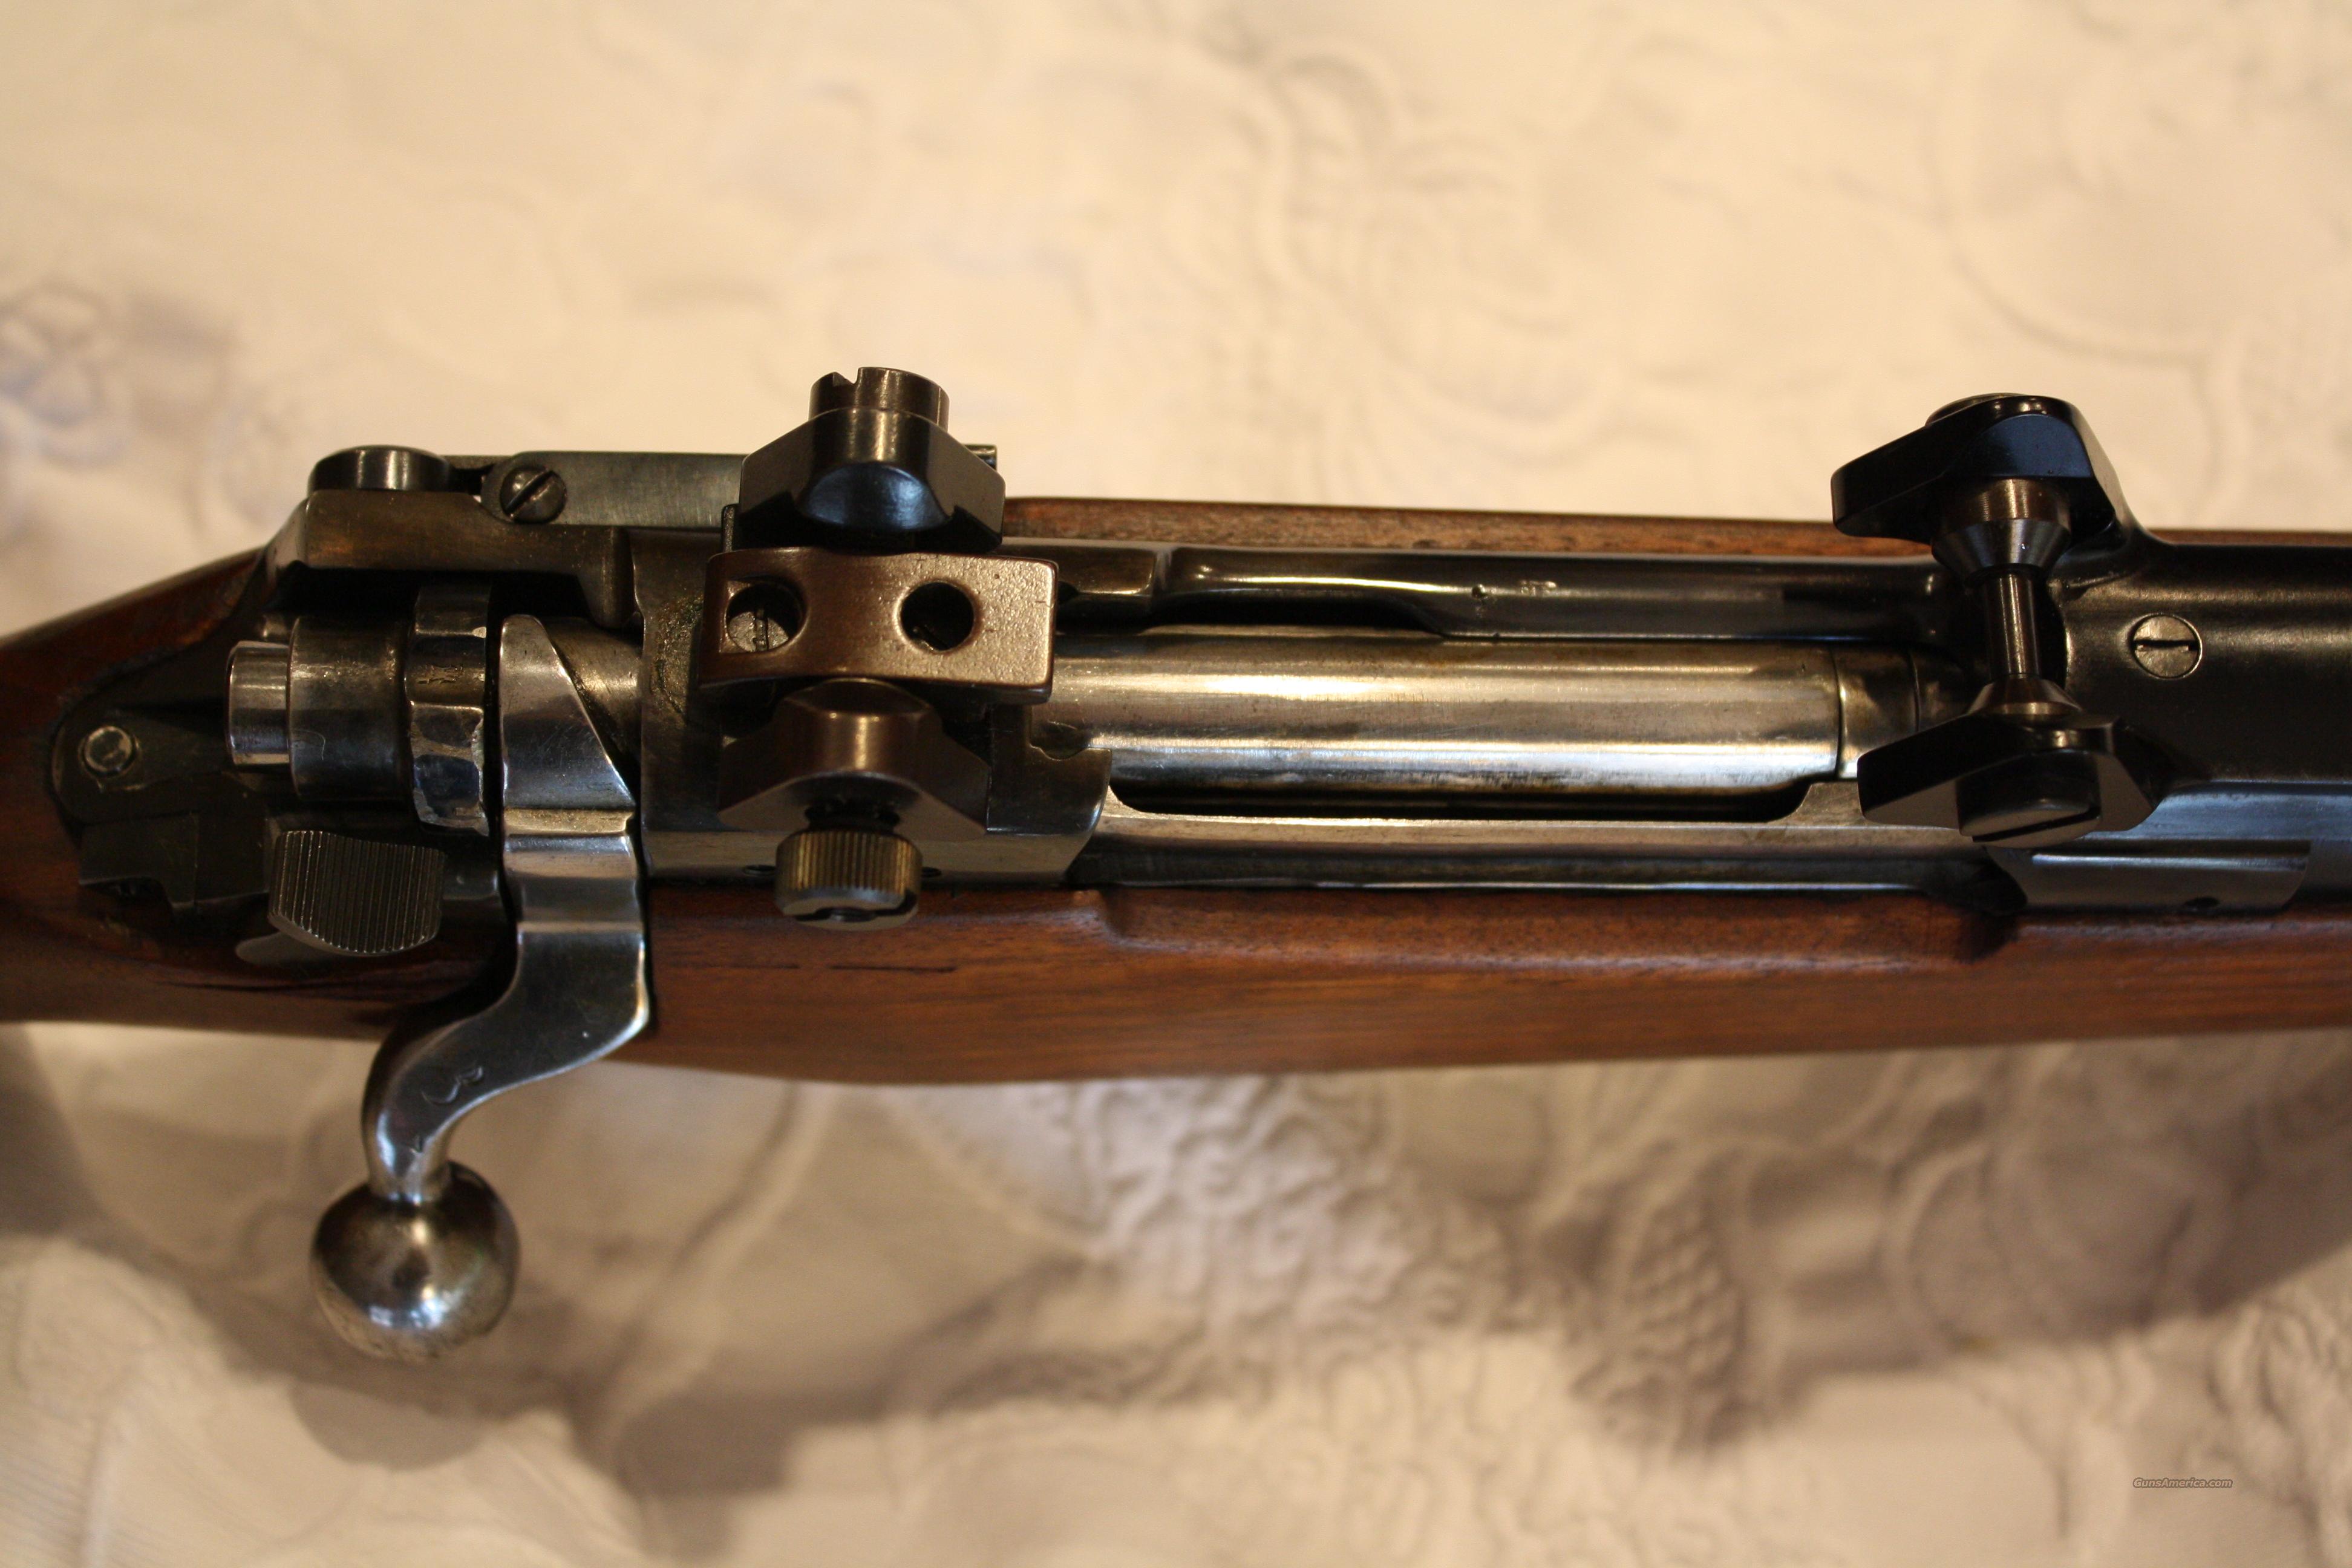 Gallery of M1917 Enfield Hunting Rifle.